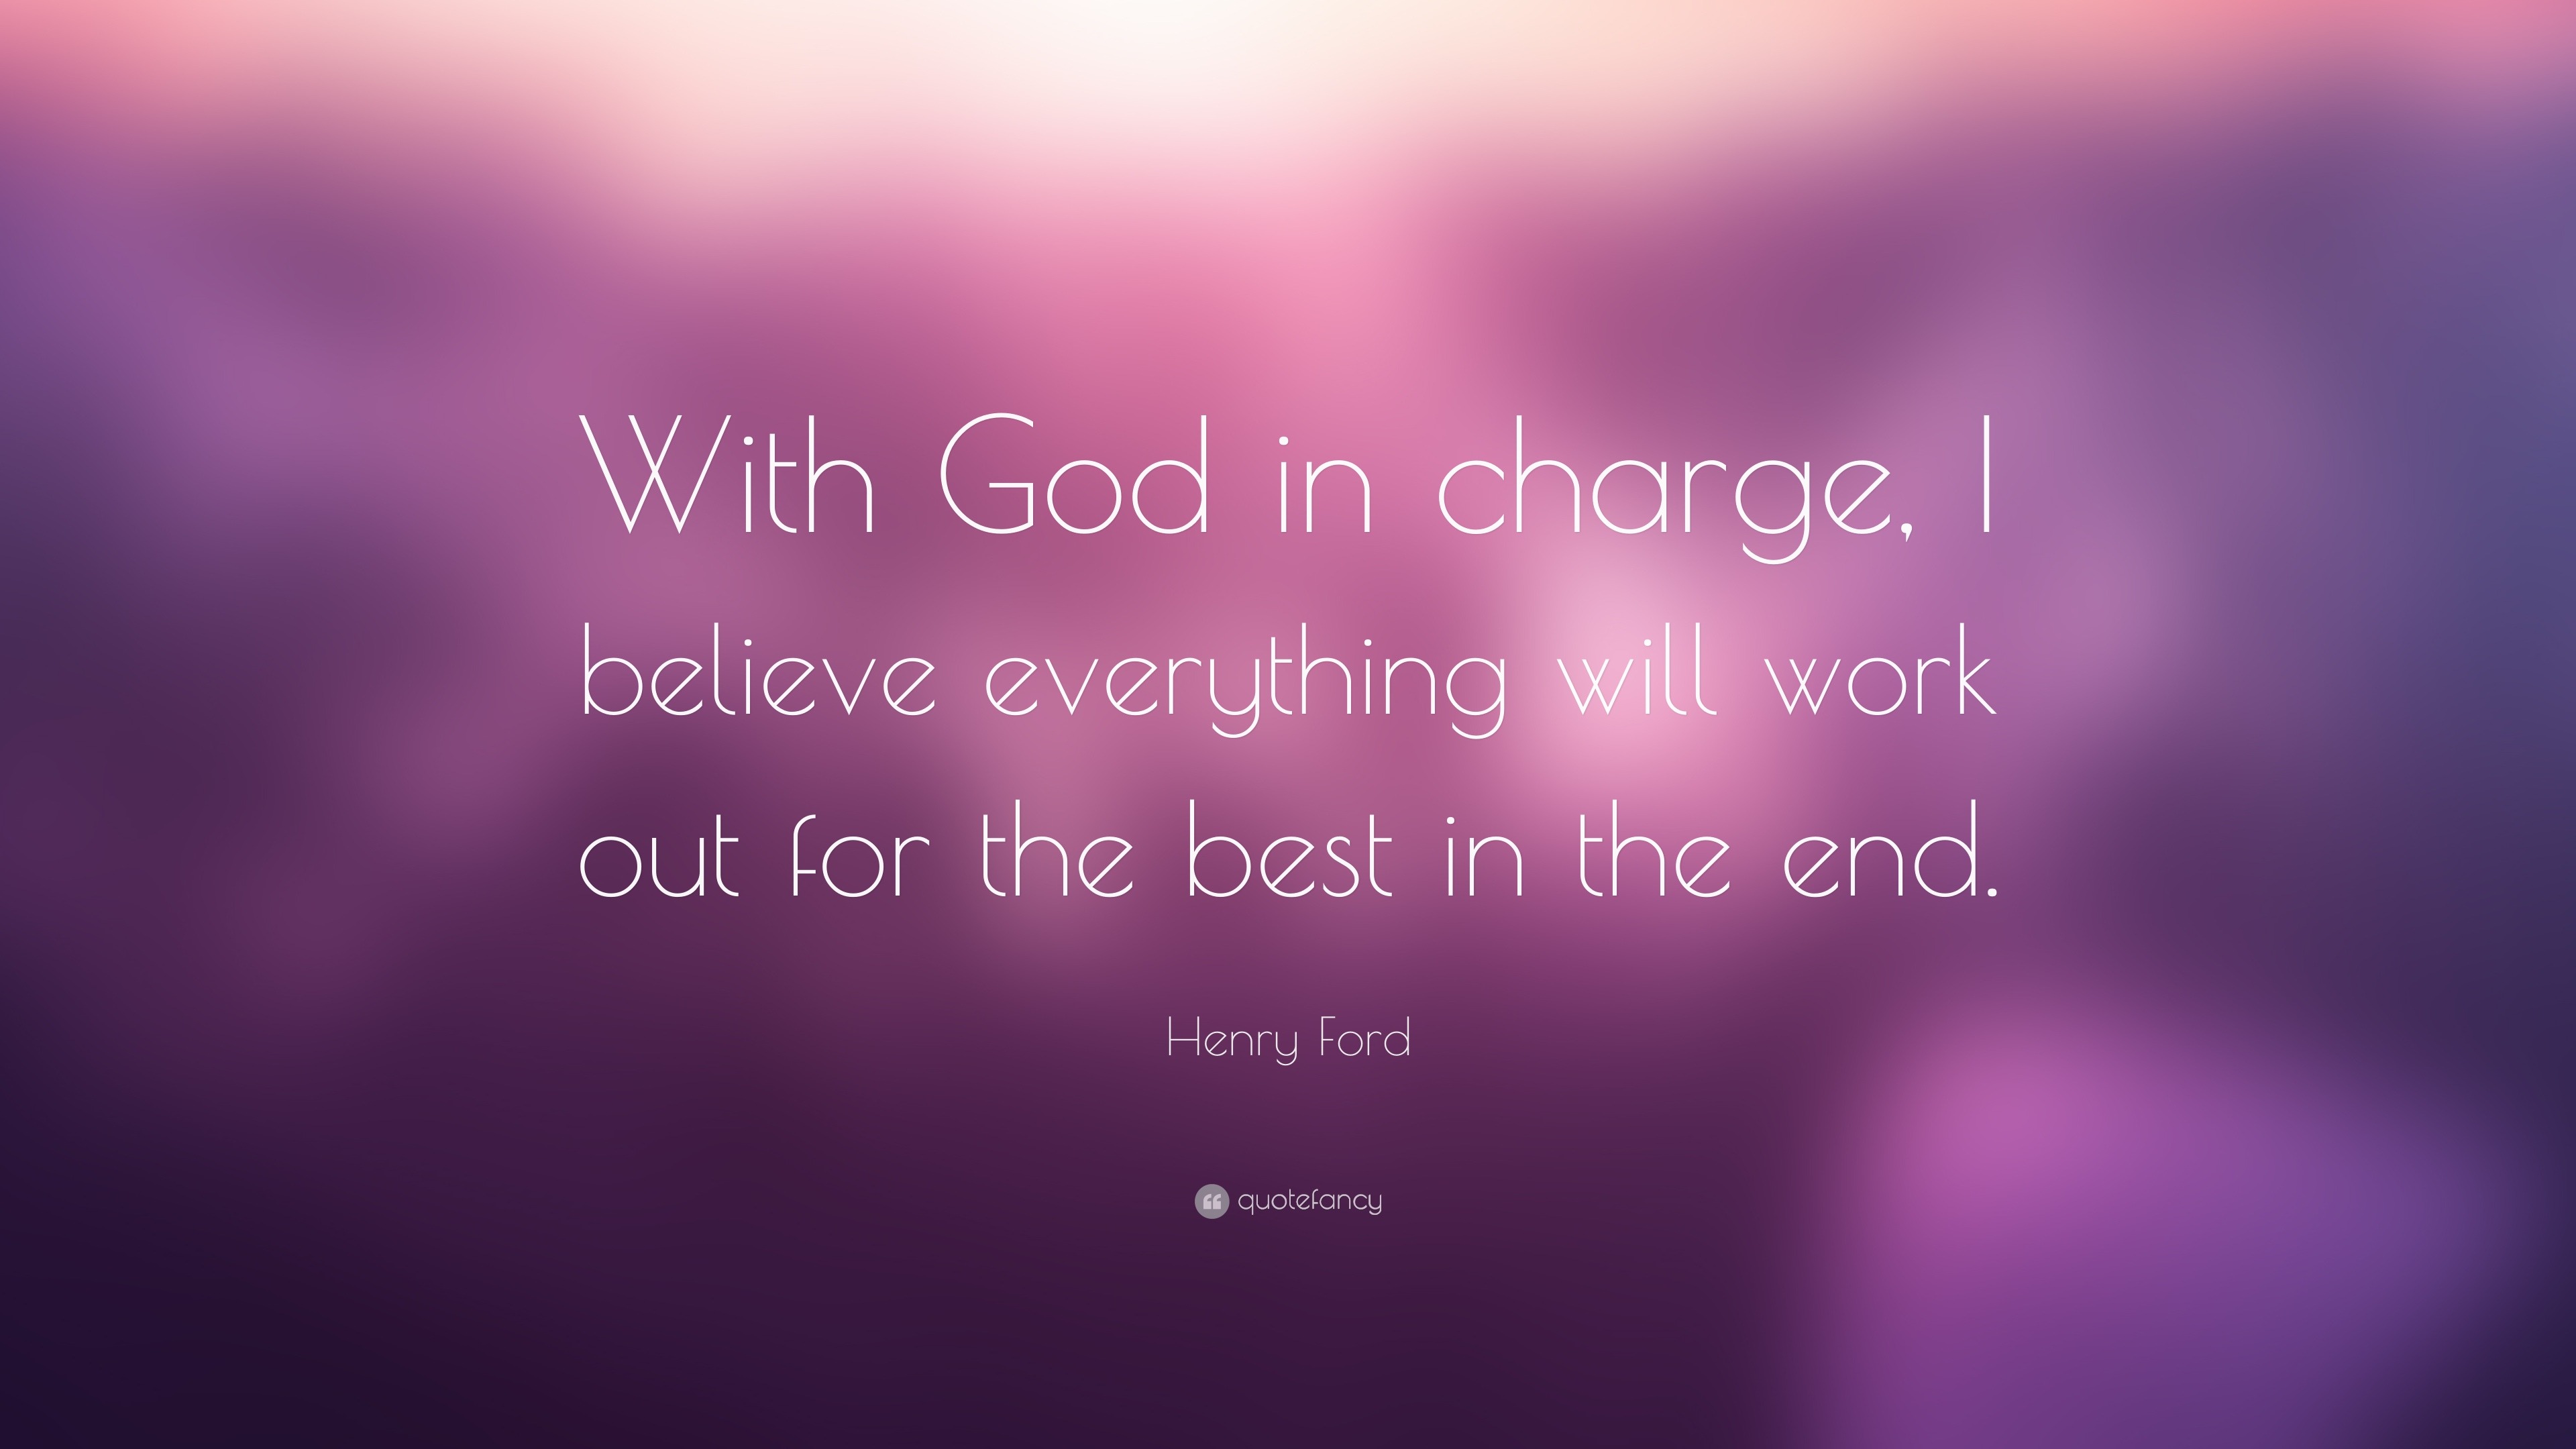 Henry Ford Quote: “With God in charge, I believe everything will work